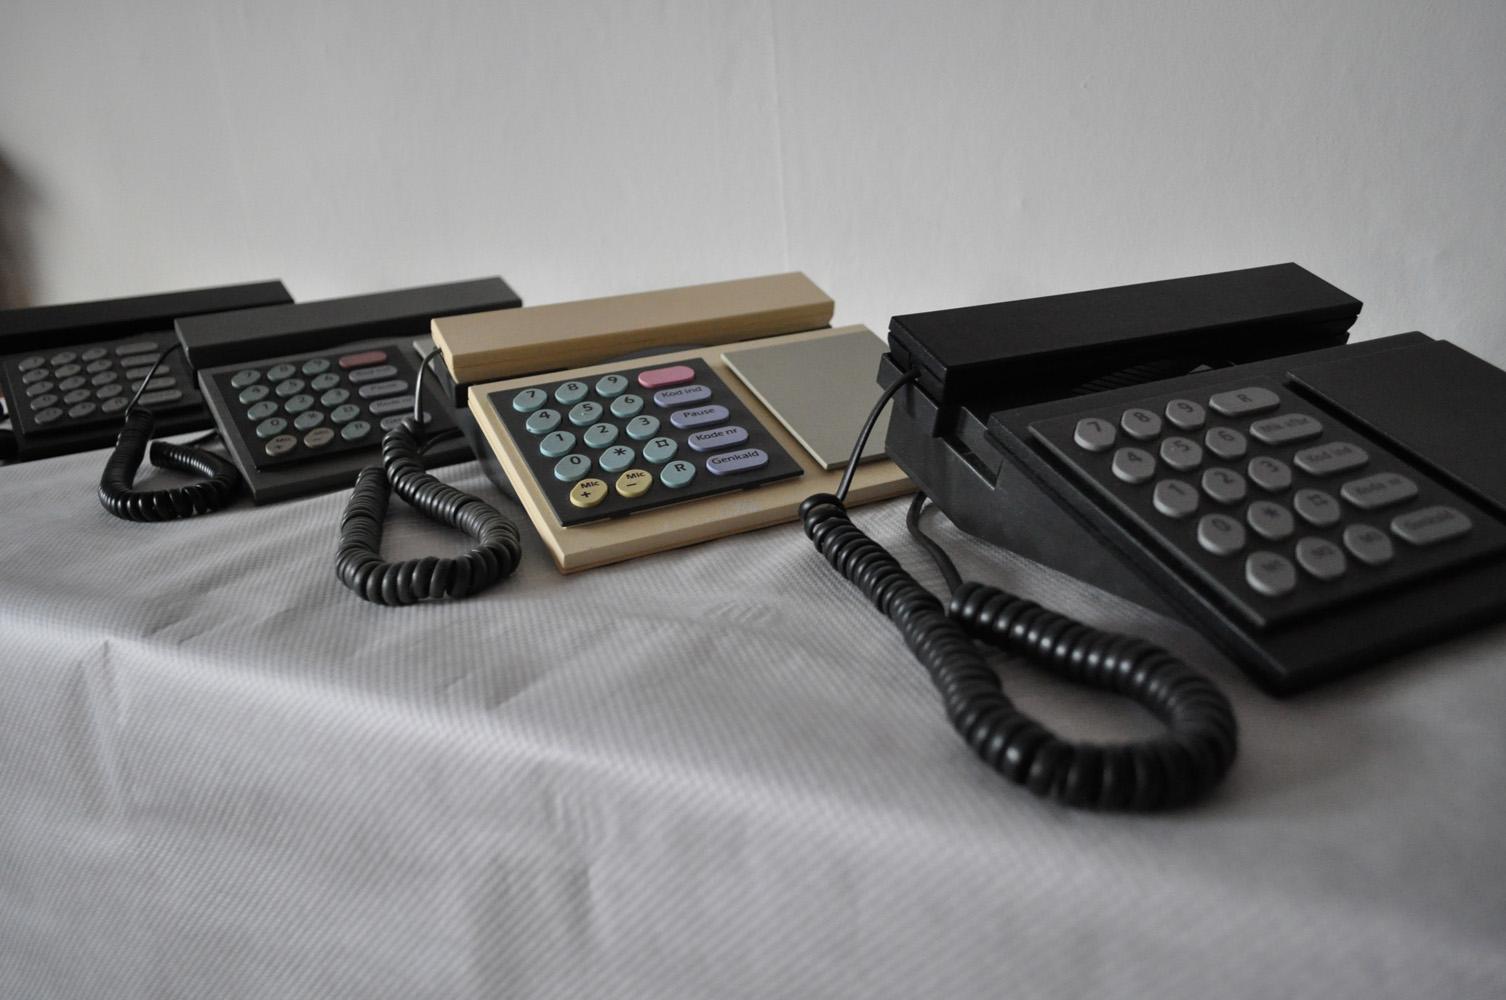 Scandinavian Modern Iconic Beocom 600 Telephone from 1986 by Bang & Olusfen For Sale